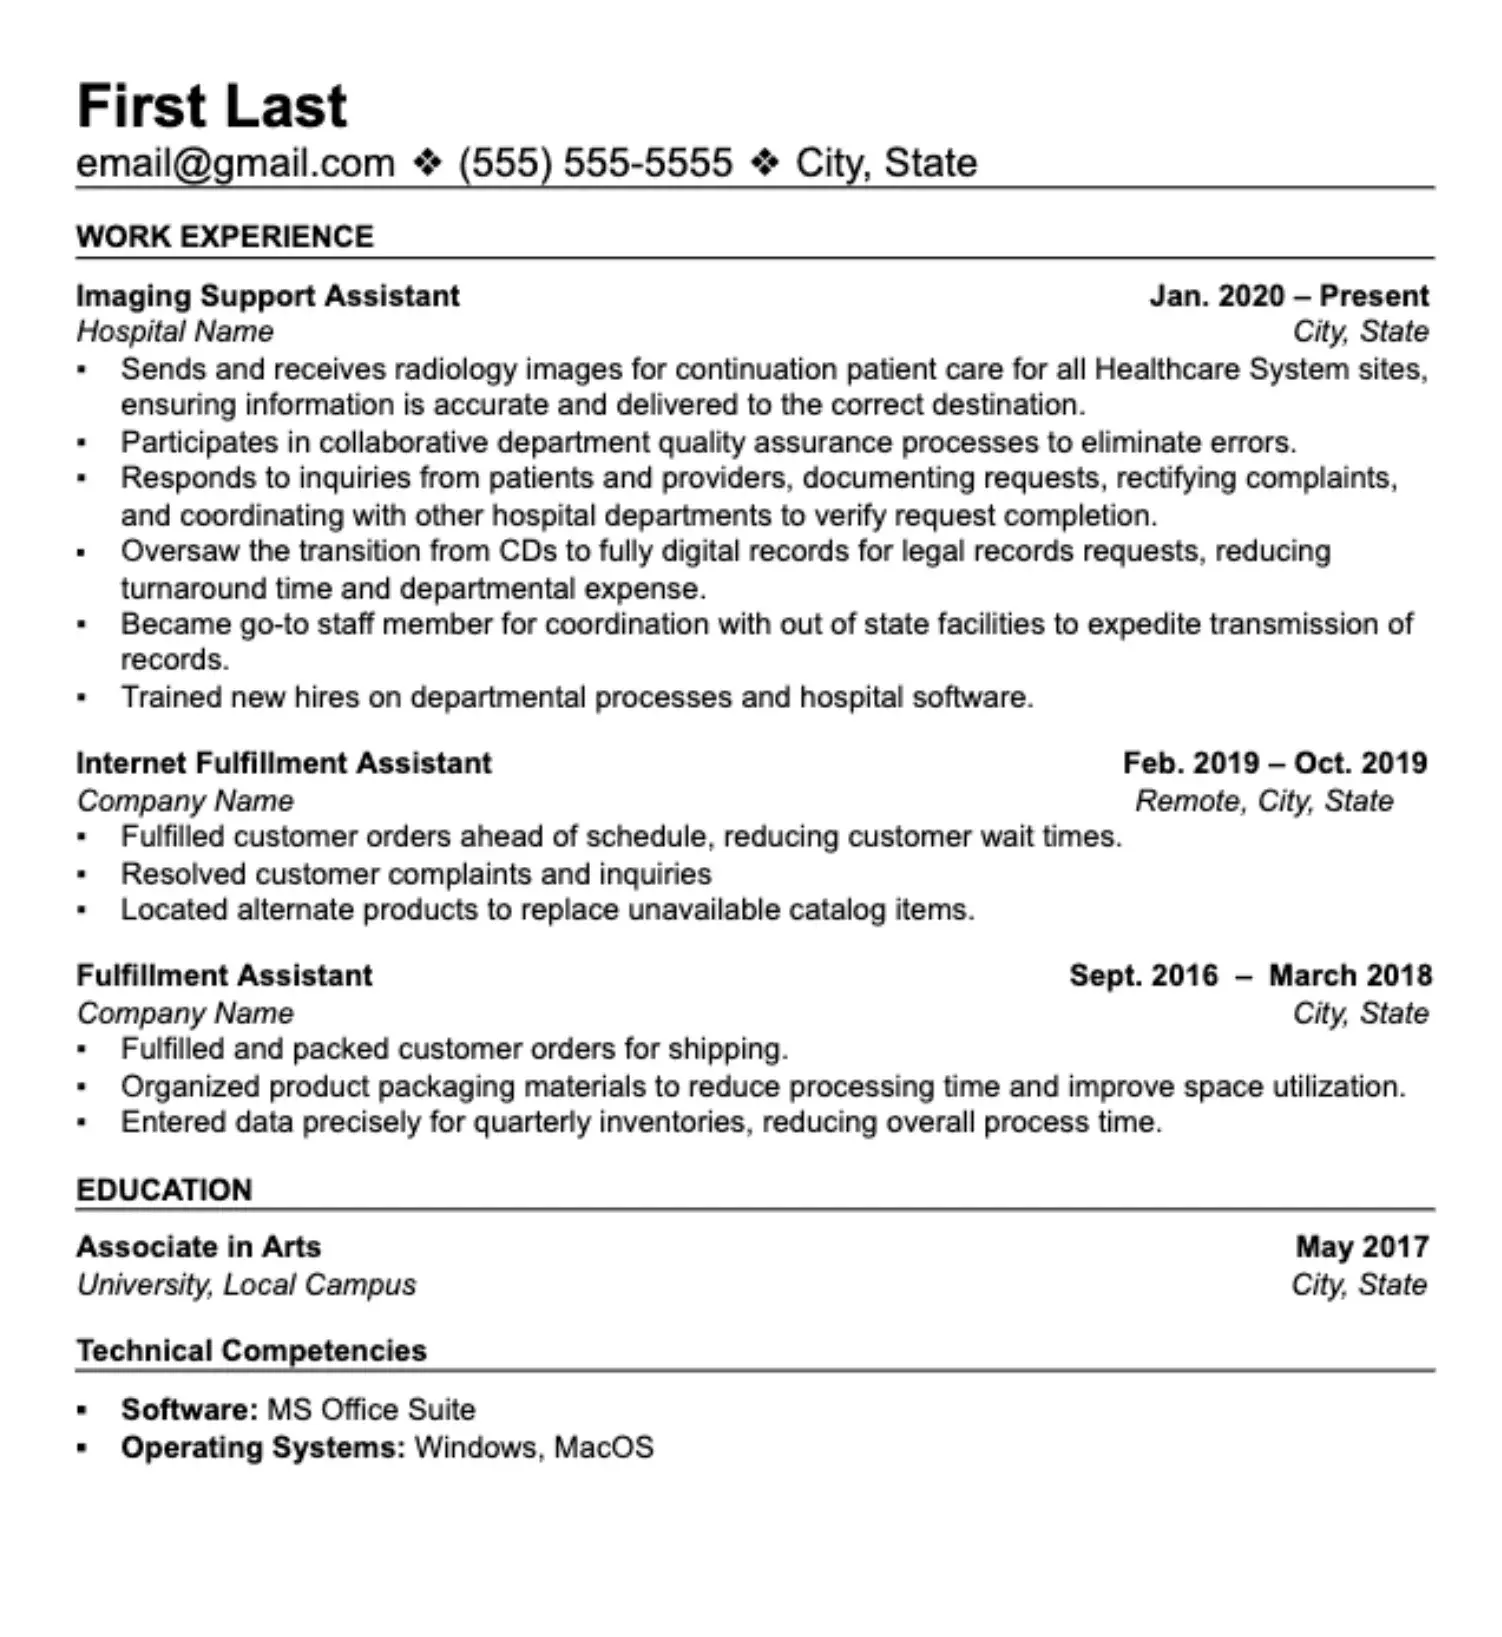 a resume highlighting customer service experience.